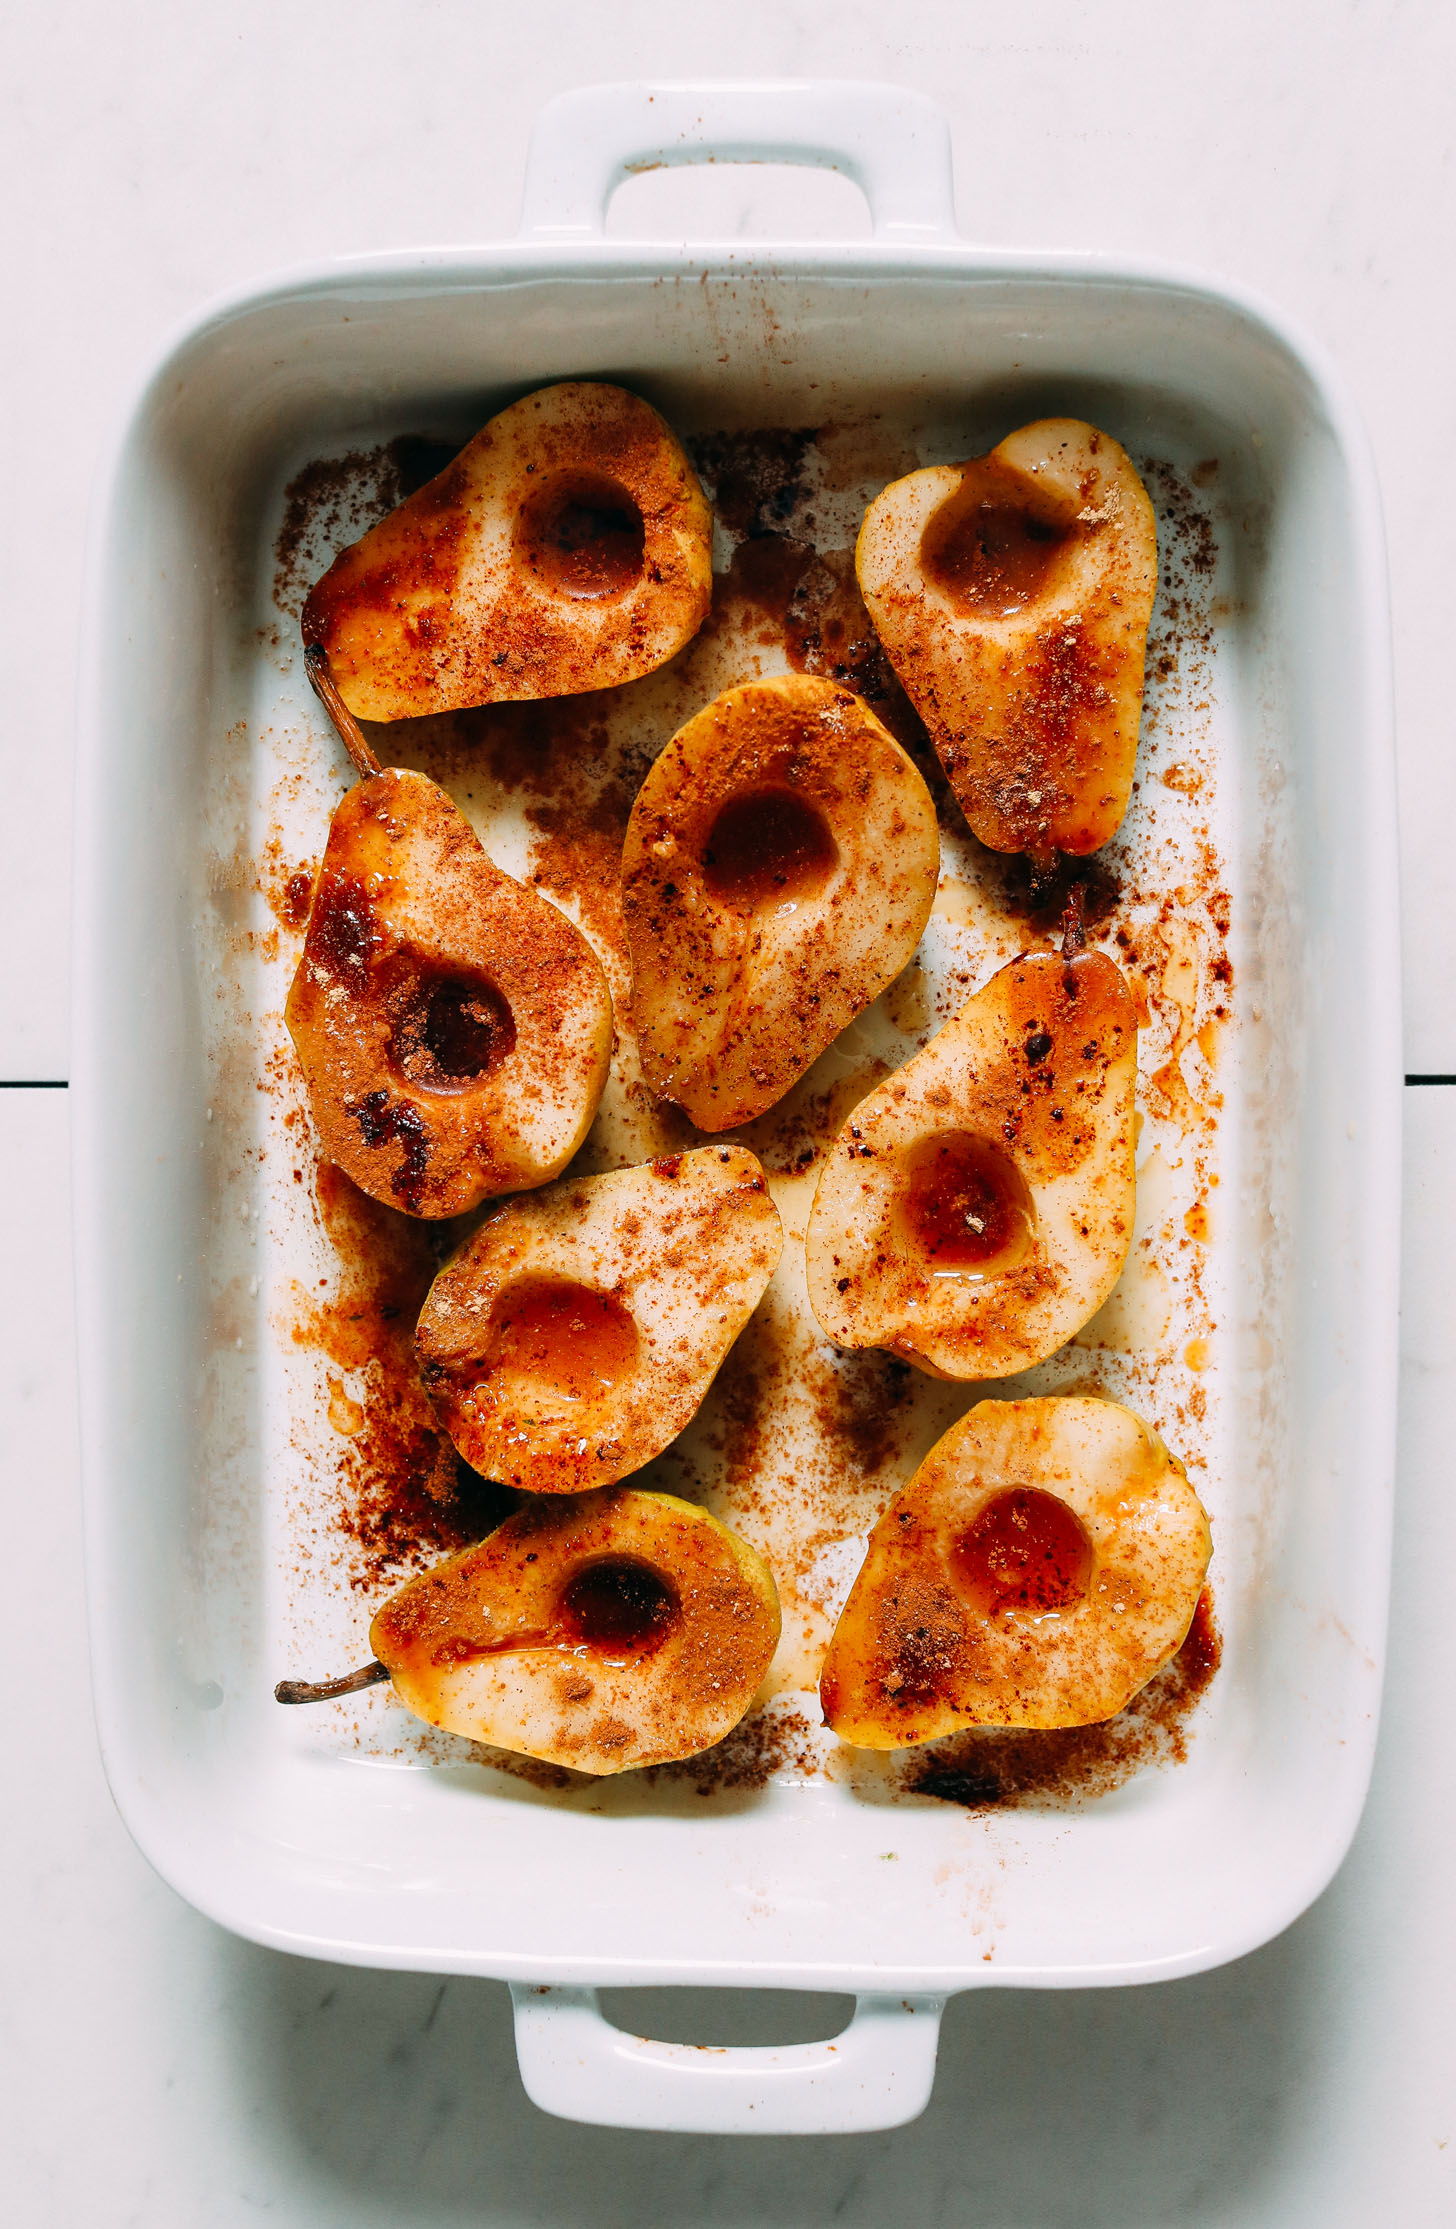 Baking dish of halved pears topped with maple syrup, coconut sugar, and spices